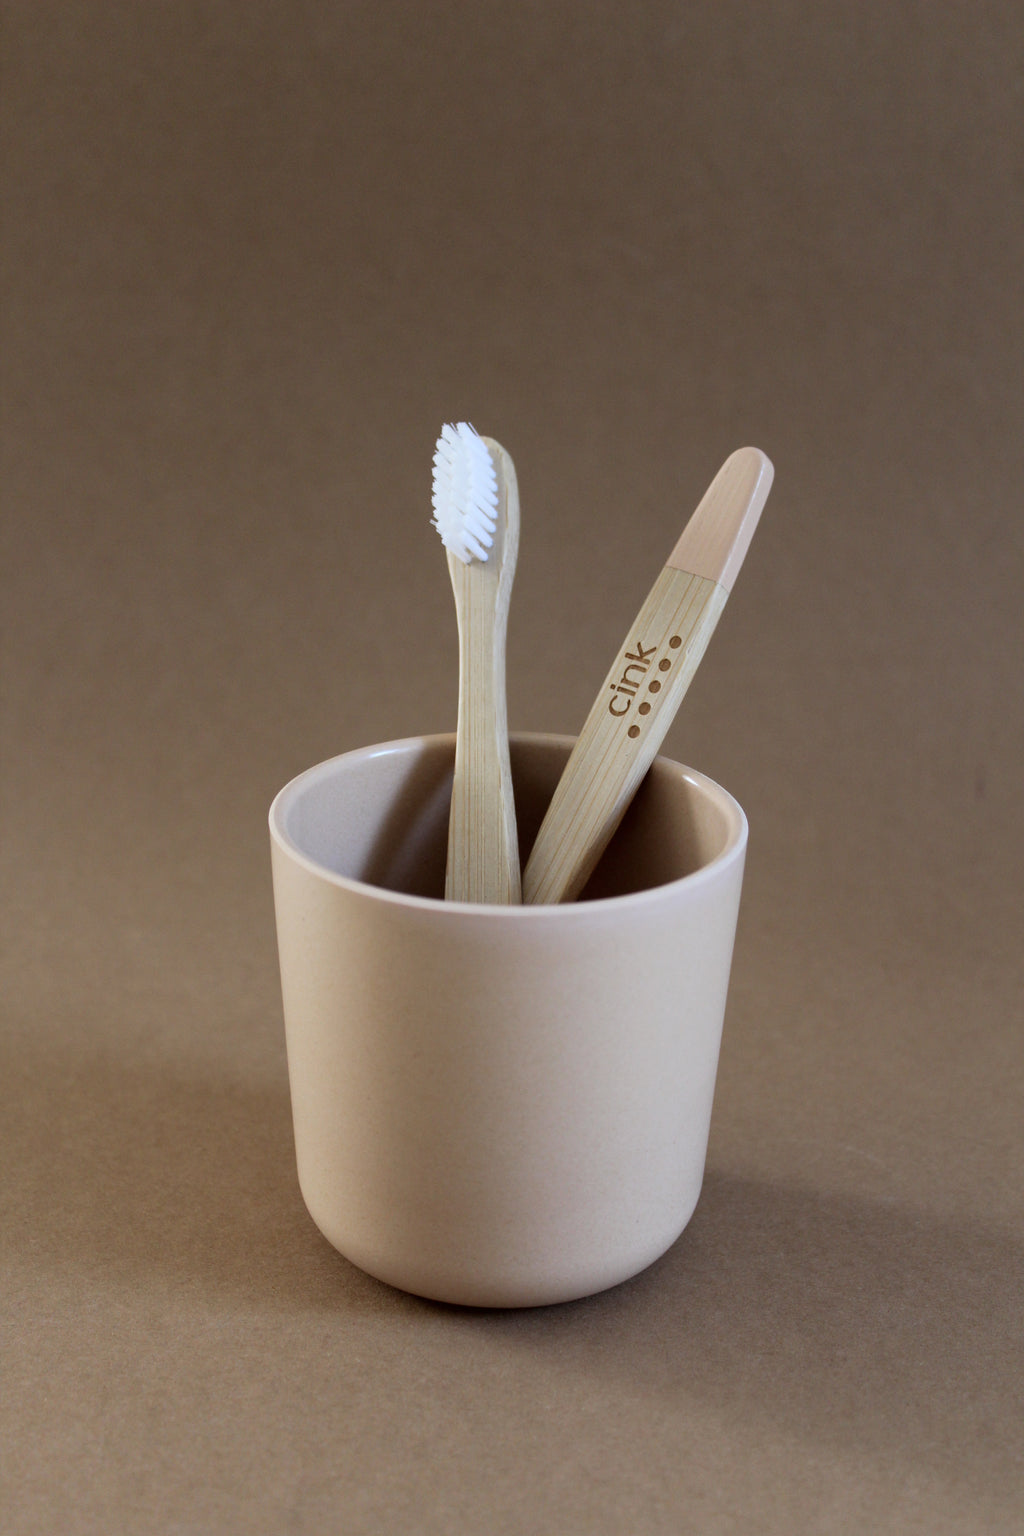 recyclable toothbrush for babies